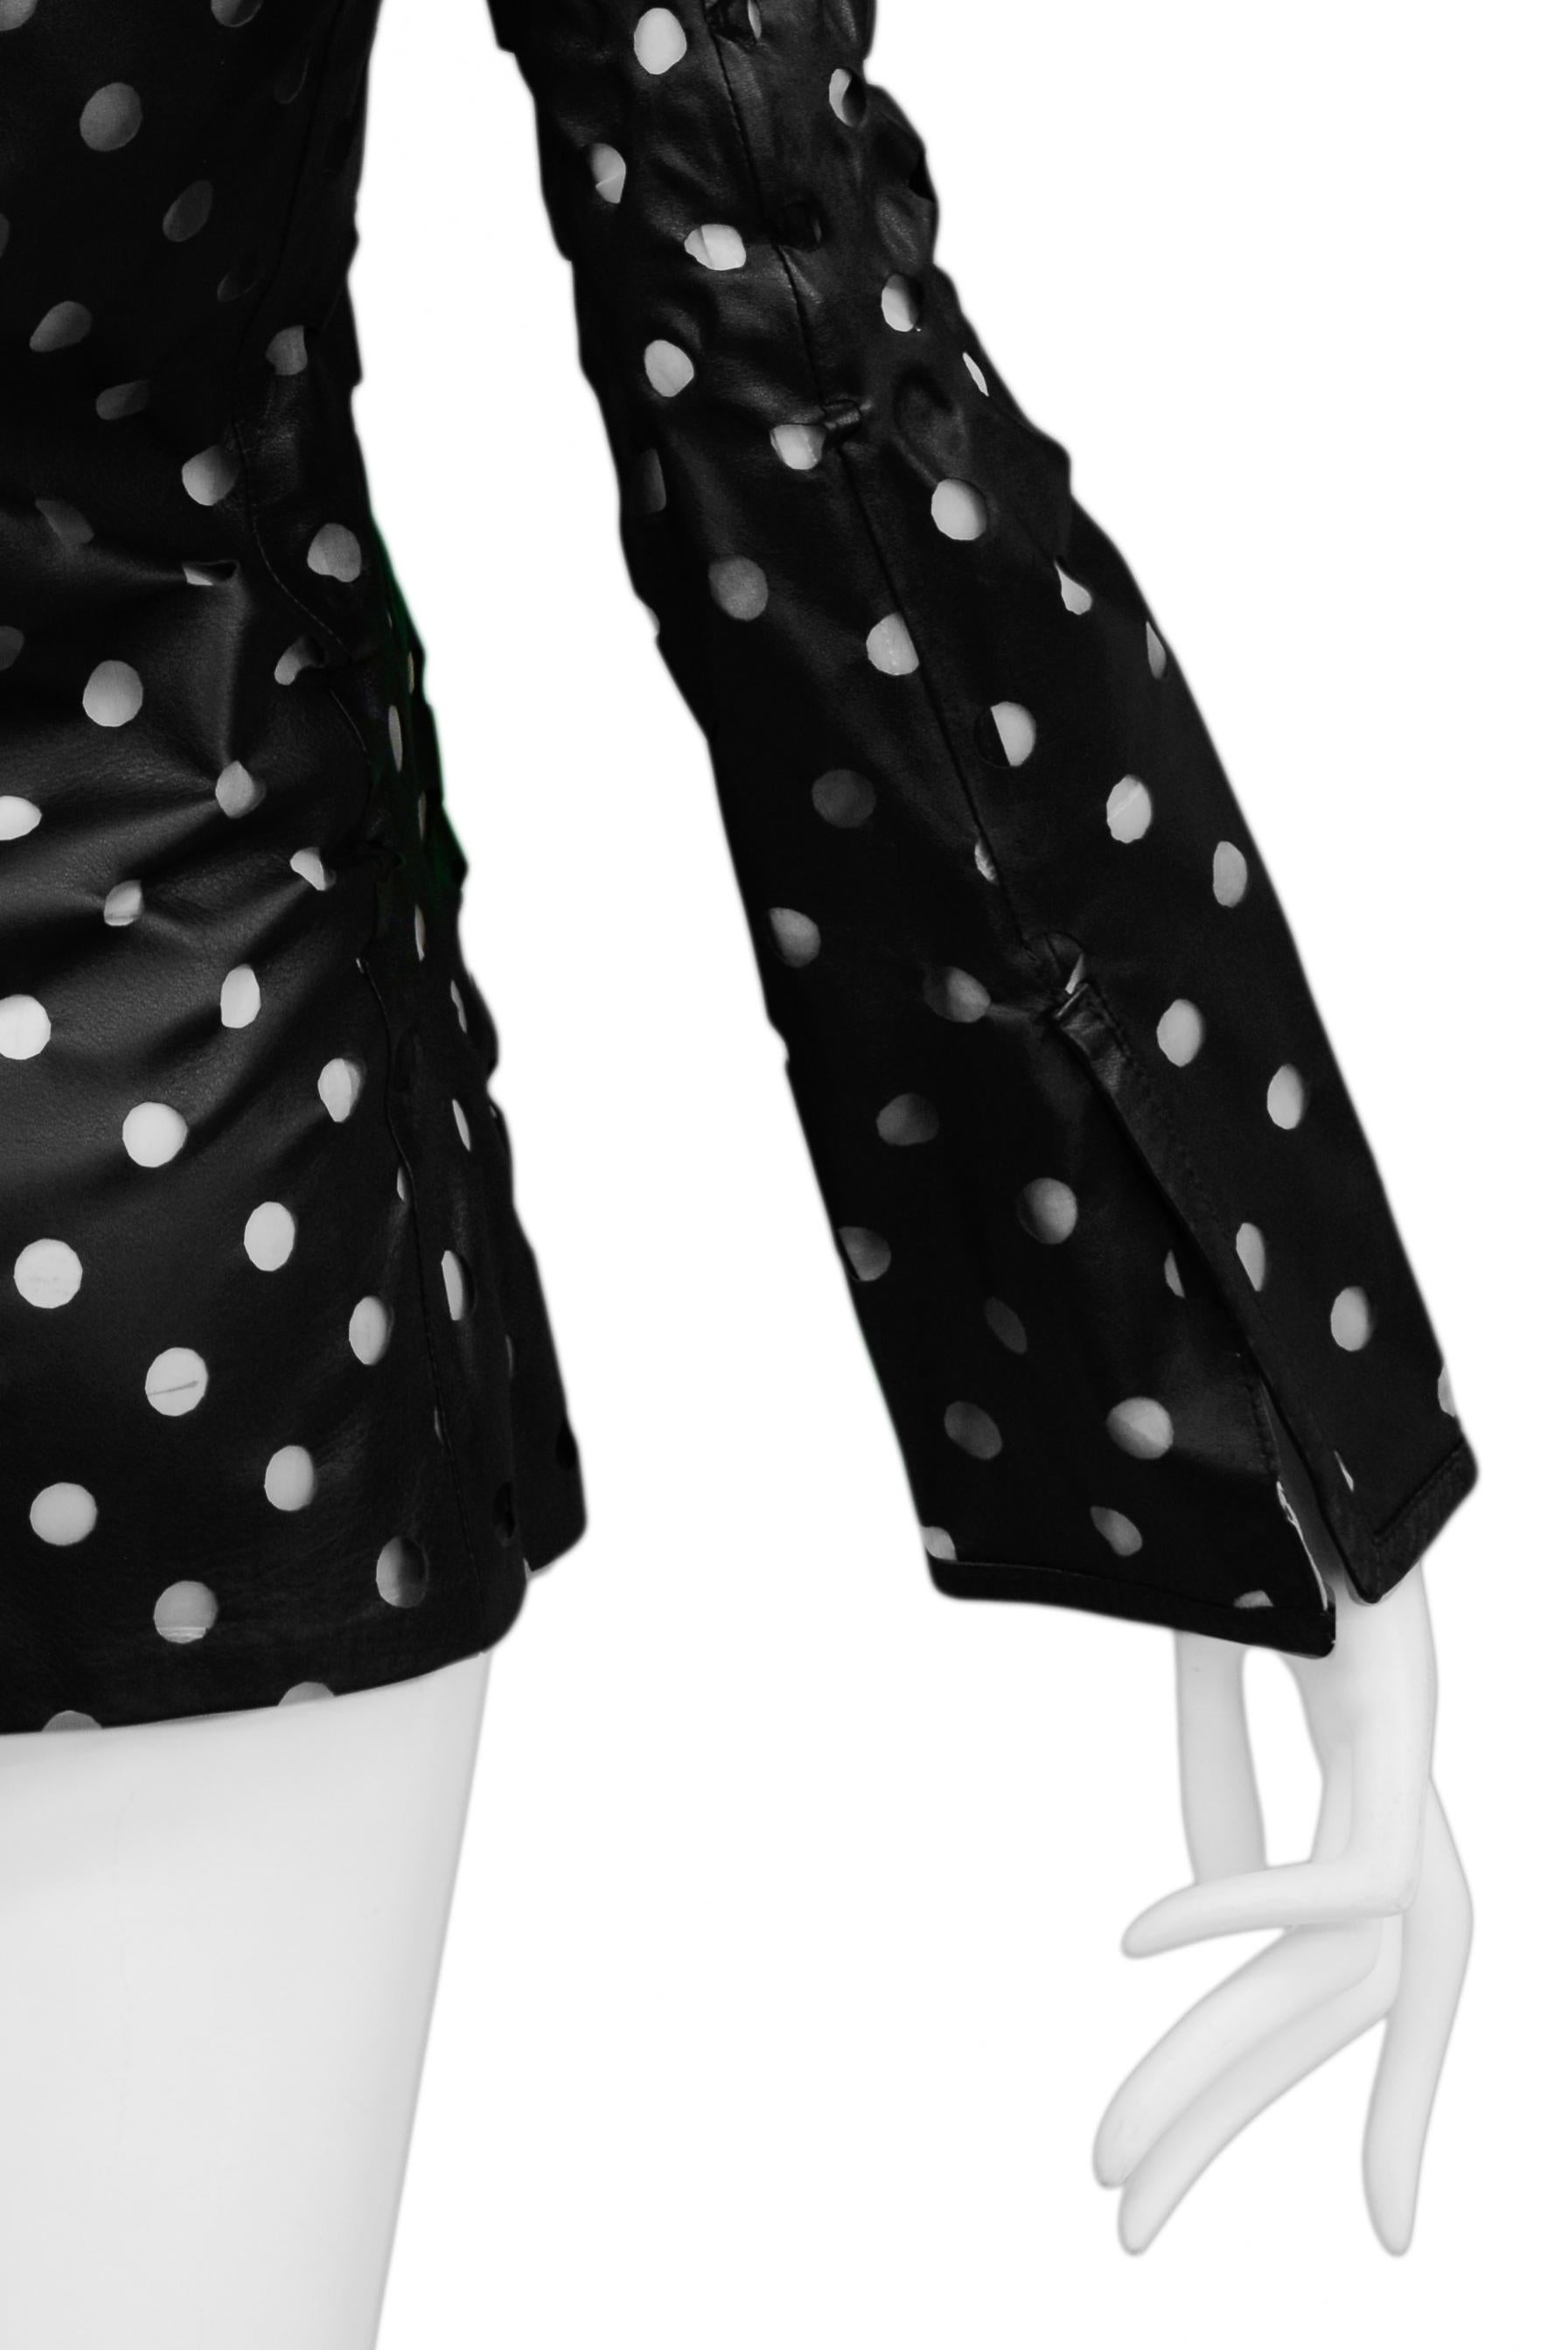 Gianfranco Ferre Black Leather Cut-Out Dot Jacket For Sale 2